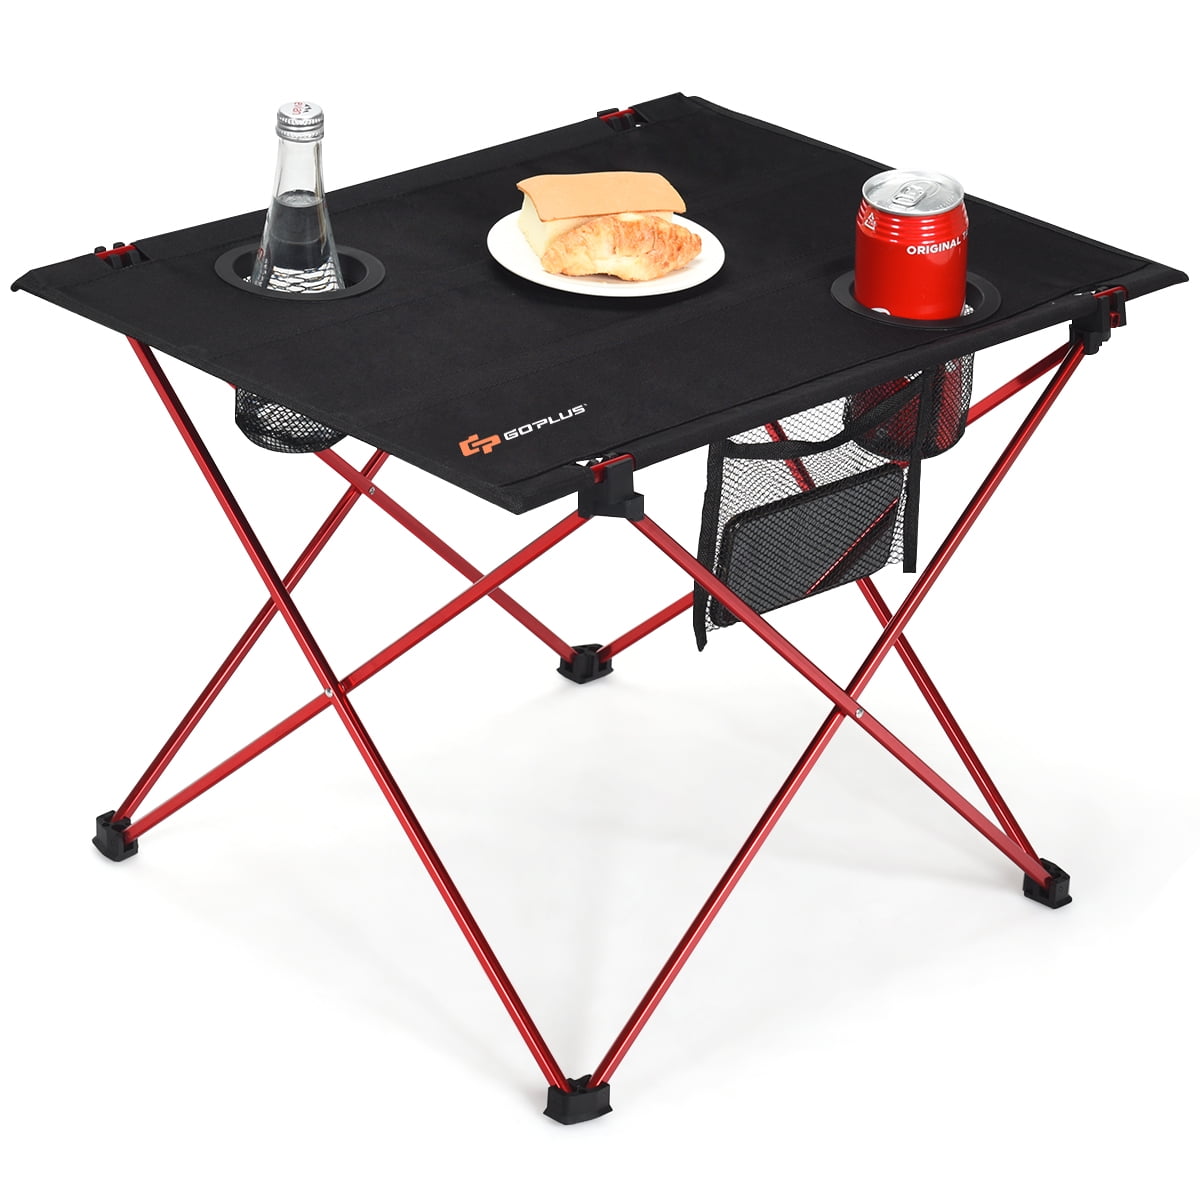 Goplus Foldable Camping Picnic Table w/ Cup Holders for Indoor and